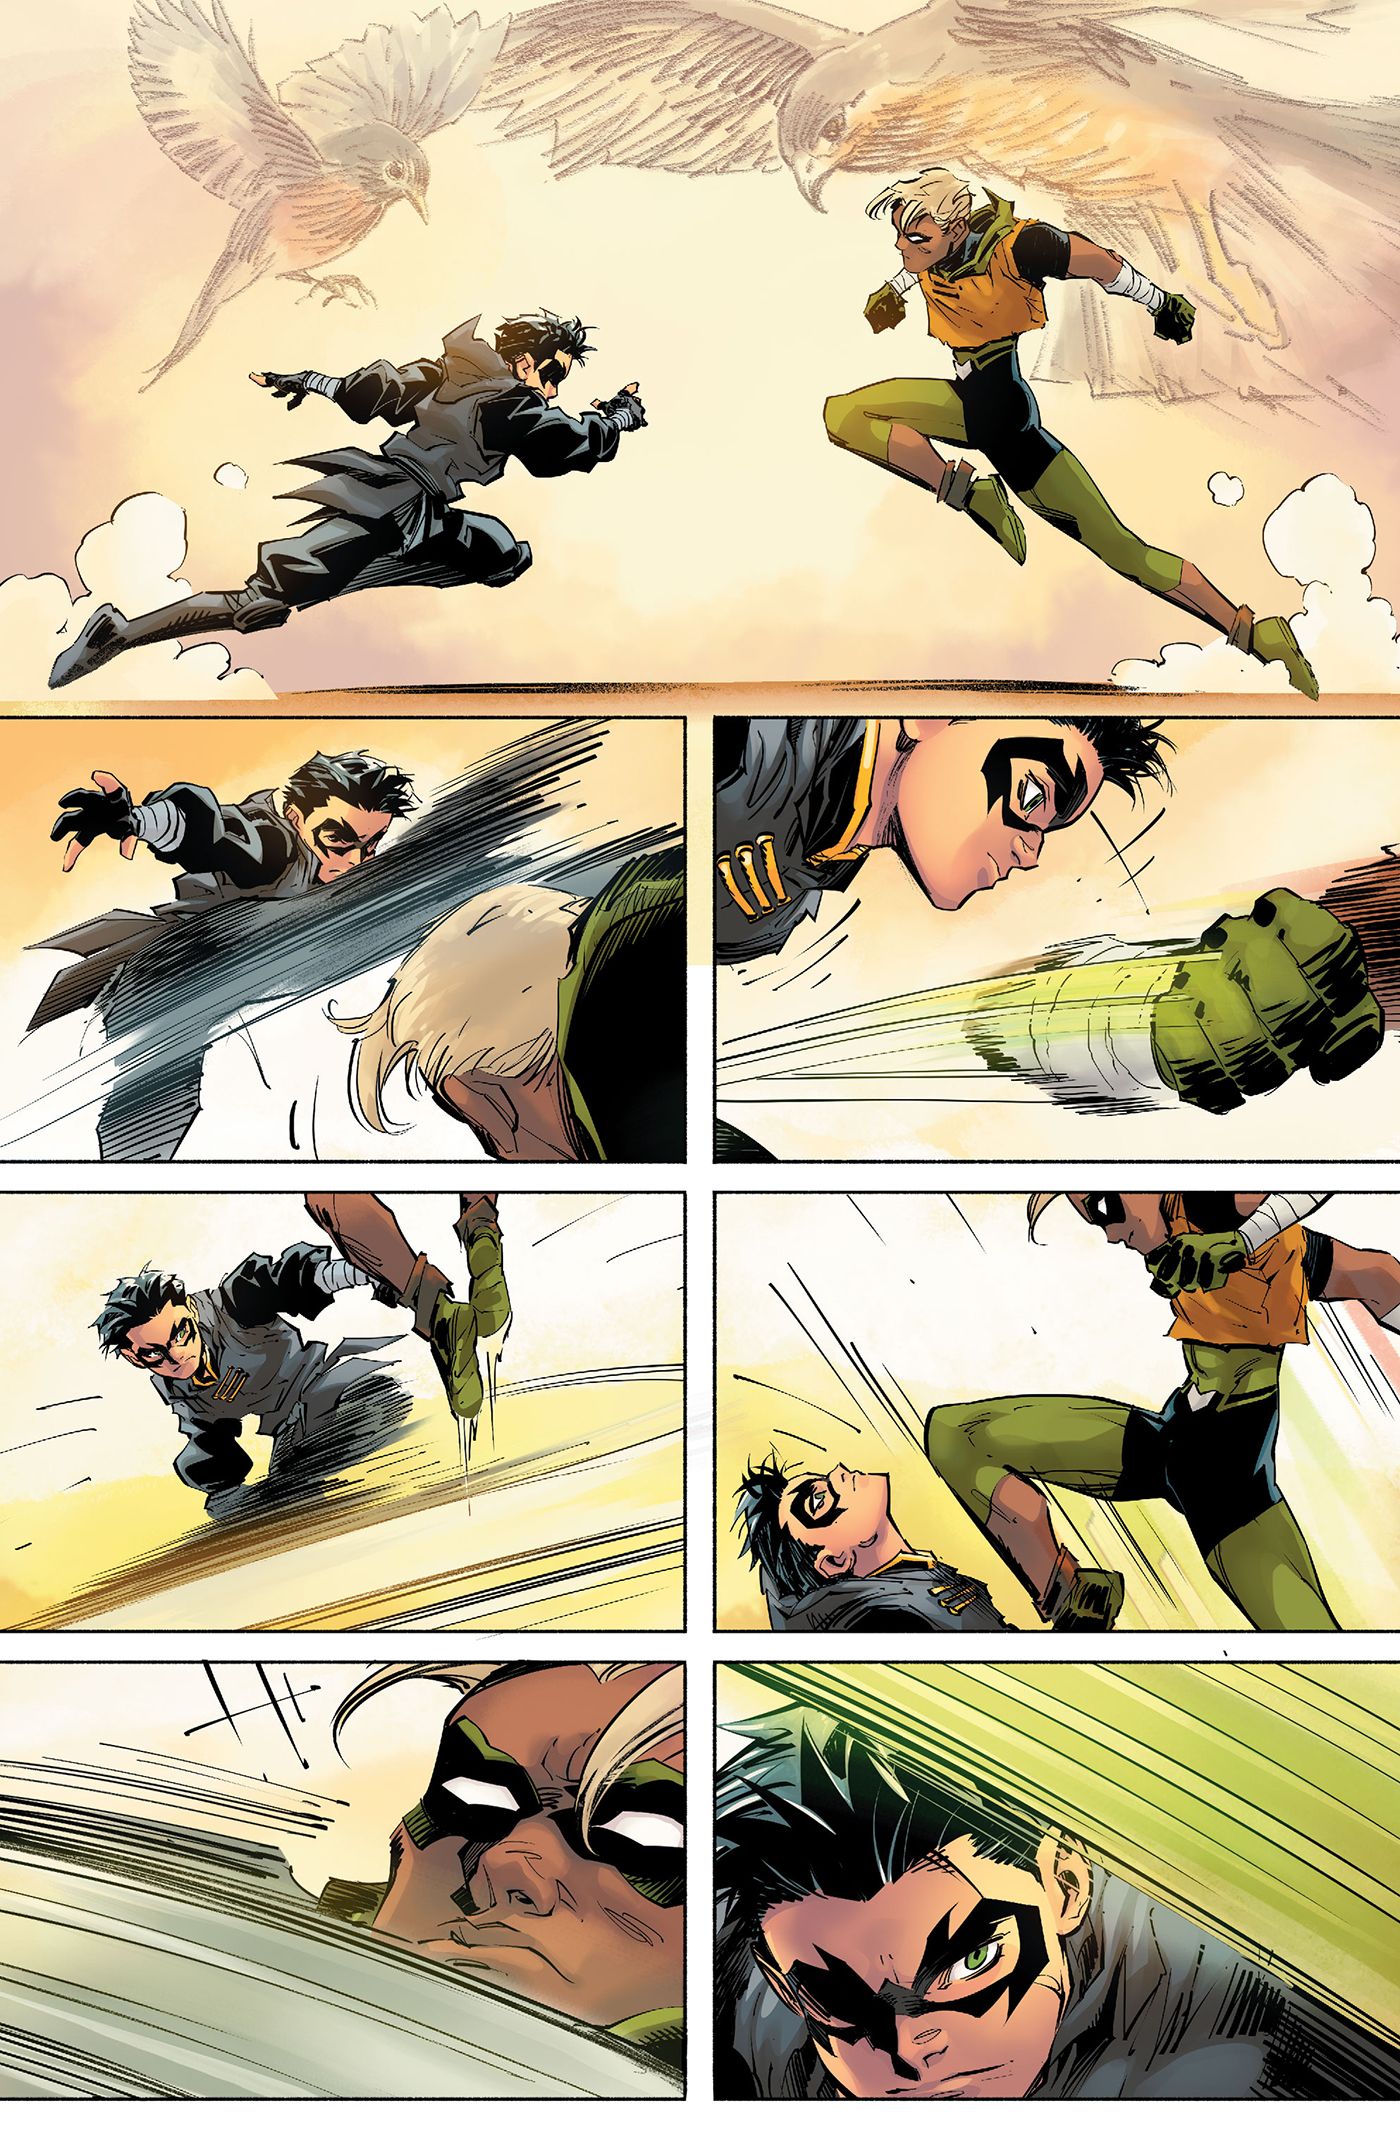 Damian and Connor begin to fight and evade one another's attacks.